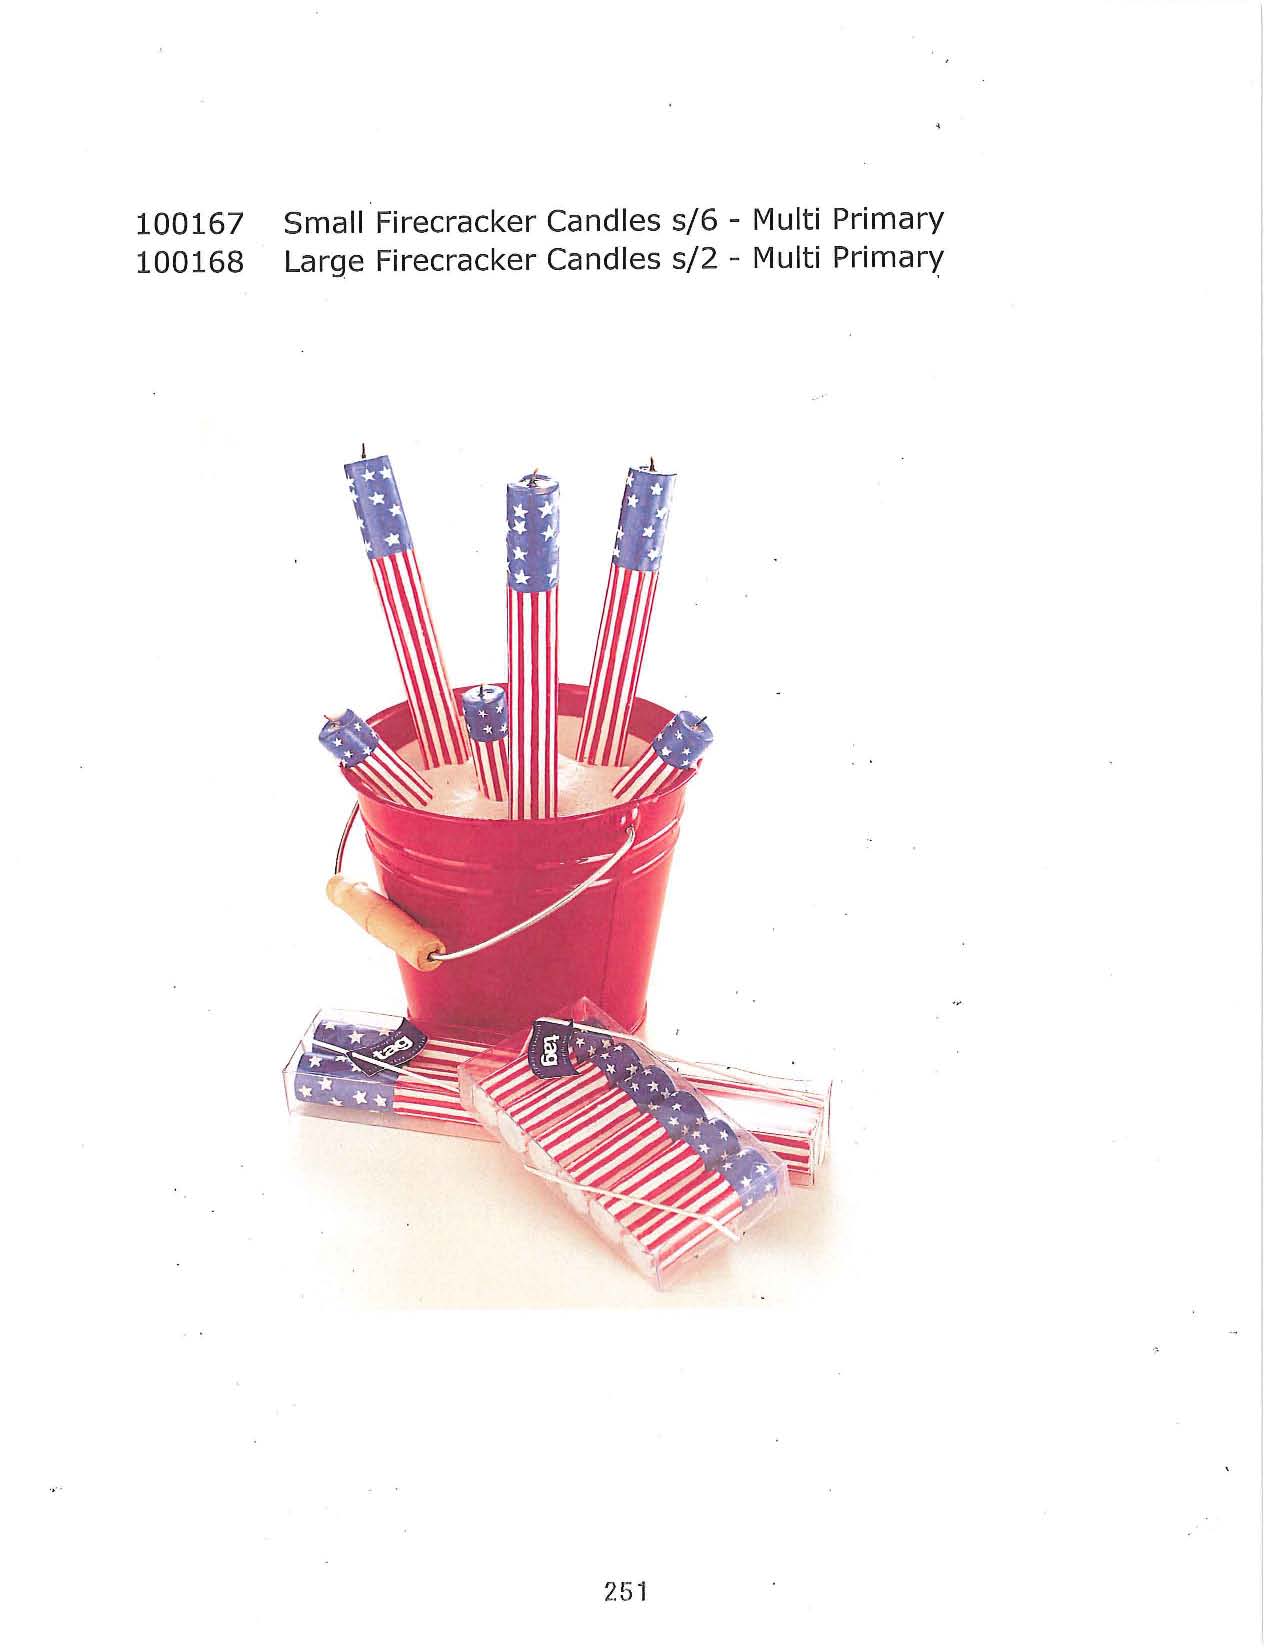 Small s/6 and Large s/2 Firecracker Candle - Multi Primary